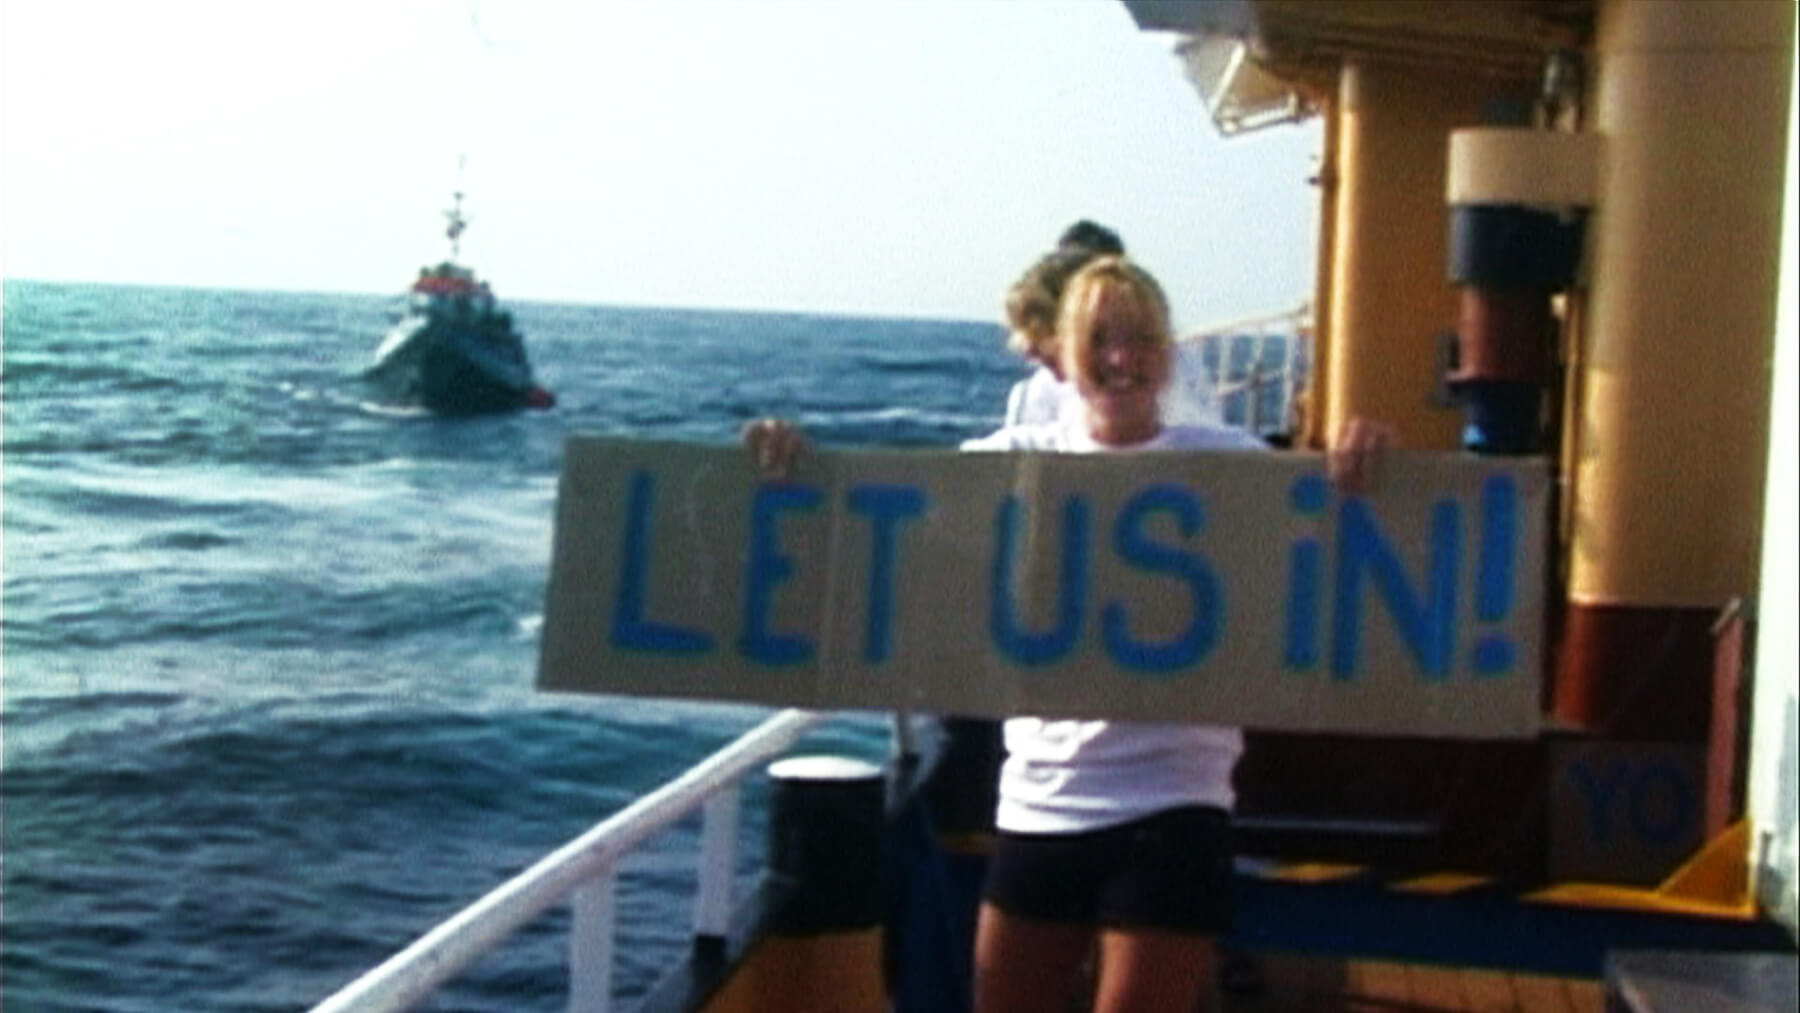 Still from Vessel. A young girl is standing on a boat in the middle of the ocean with a sign that reads, "Let us in!". There is another boat nearby in the water.